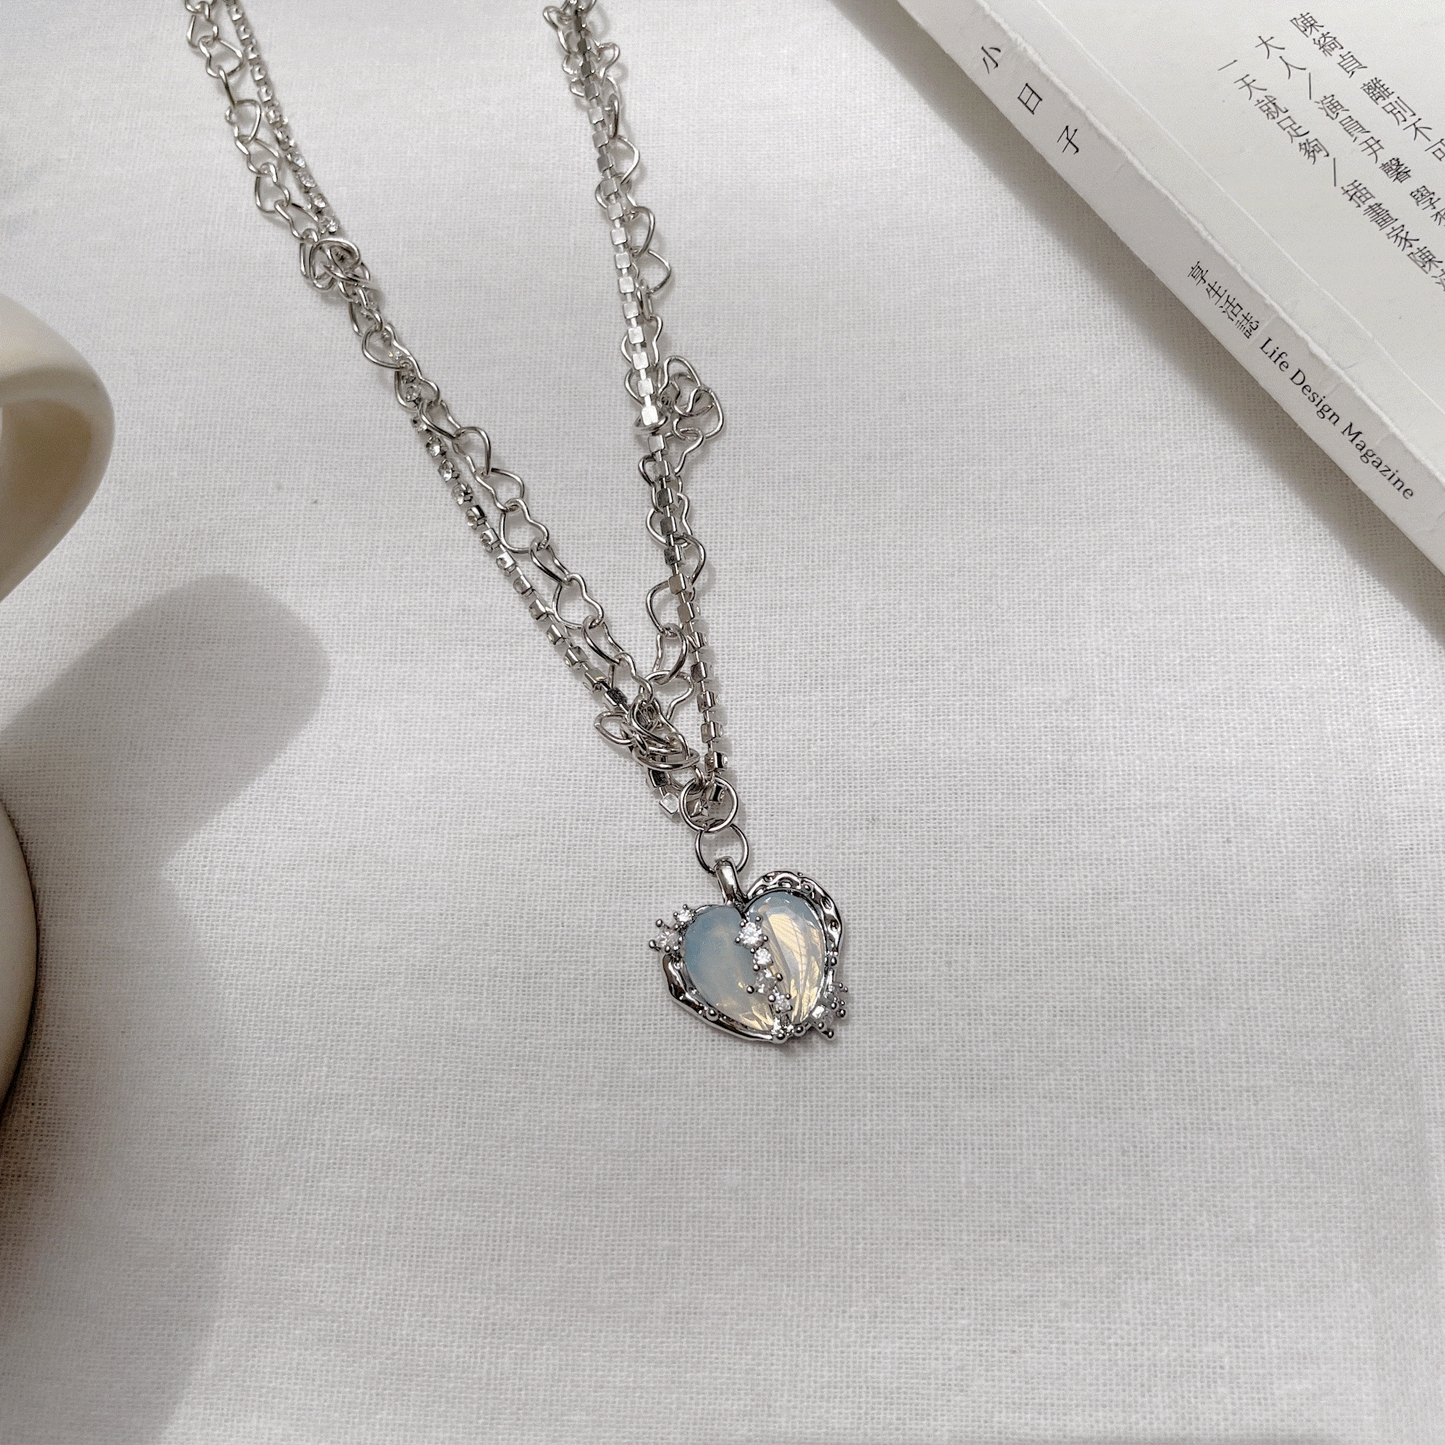 Lizz- Icy Heart Necklace